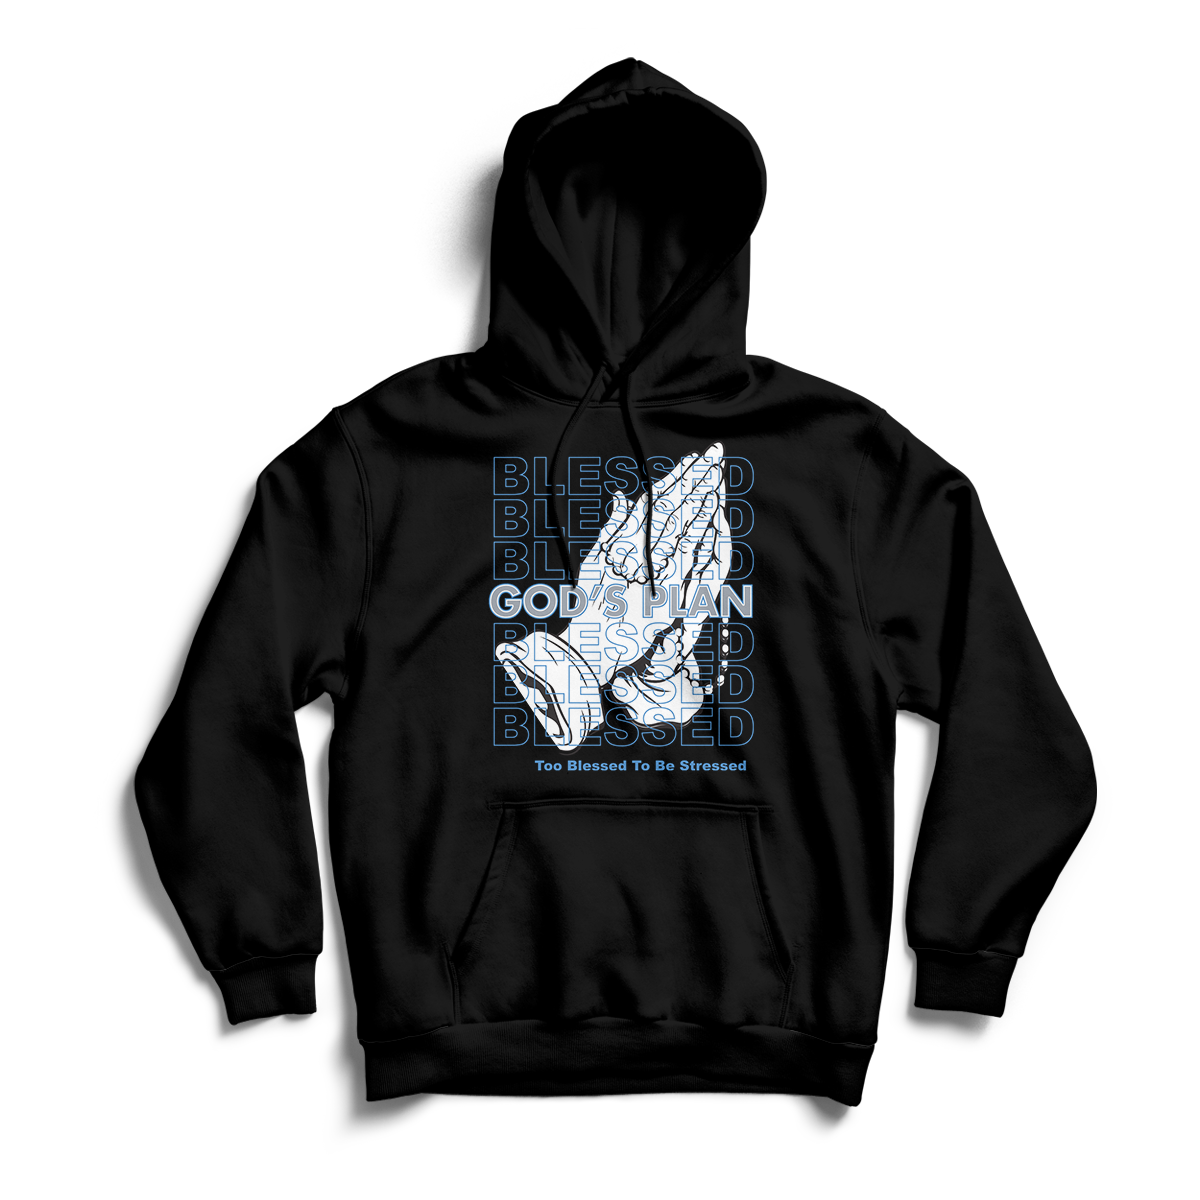 'God's Plan' in UNC CW Unisex Pullover Hoodie